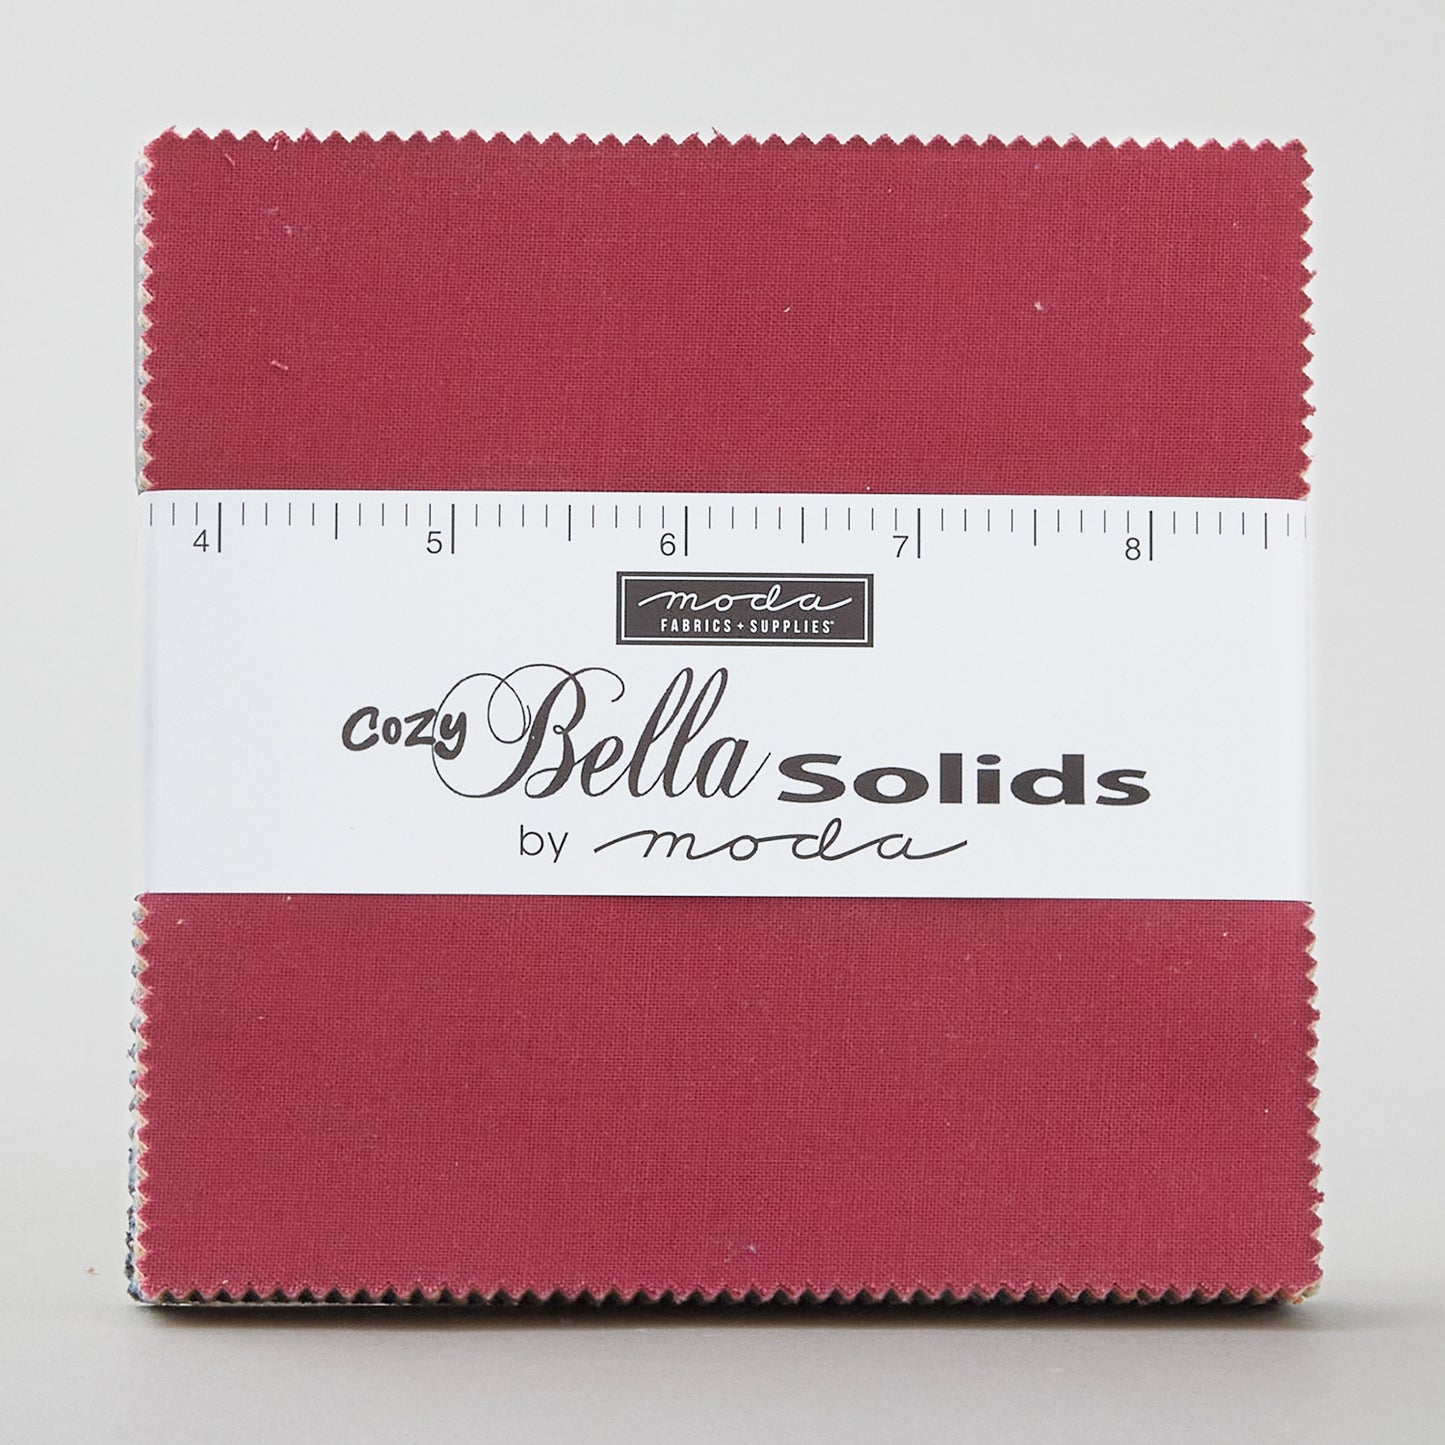 Bella Solids - Cozy Charm Pack Alternative View #1